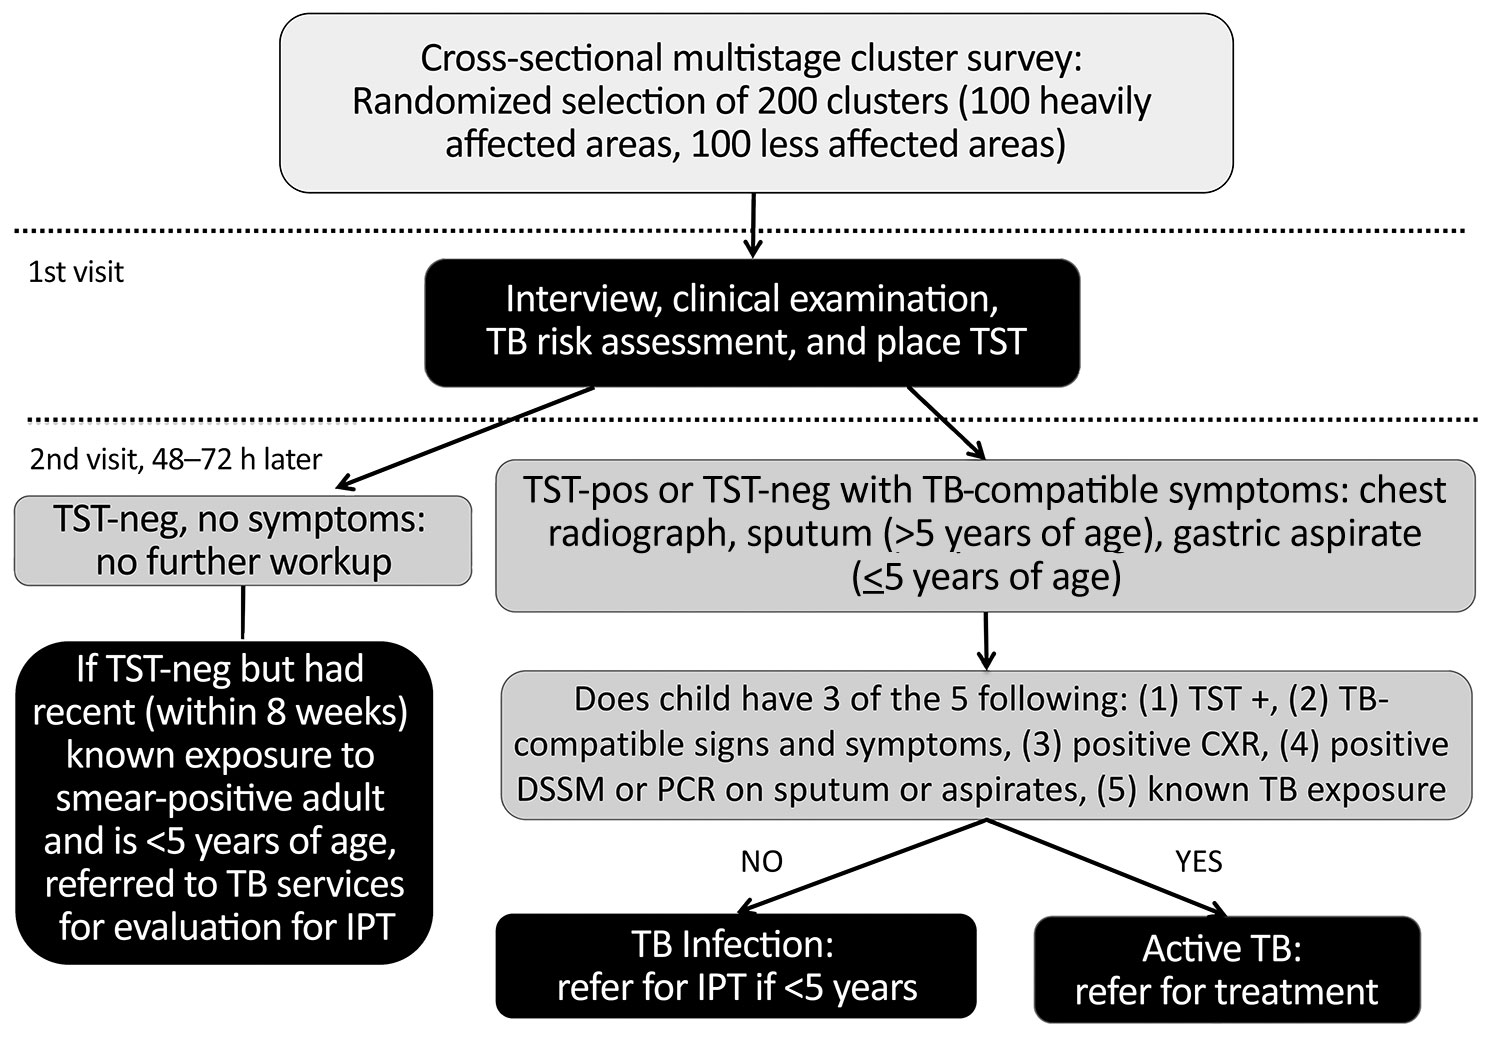 Procedures and decision tree for enrollment of study participants during community-based cluster survey of TB in children in areas affected by 2013 natural disasters, Bohol, Philippines. Positive result on chest radiograph means evidence of infiltrates, consolidation, or cavitary lesions suggestive of TB disease. DSSM, direct sputum smear microscopy; IPT, isoniazid preventive therapy; neg, negative; pos, positive; TB, tuberculosis; TST, tuberculin skin test.